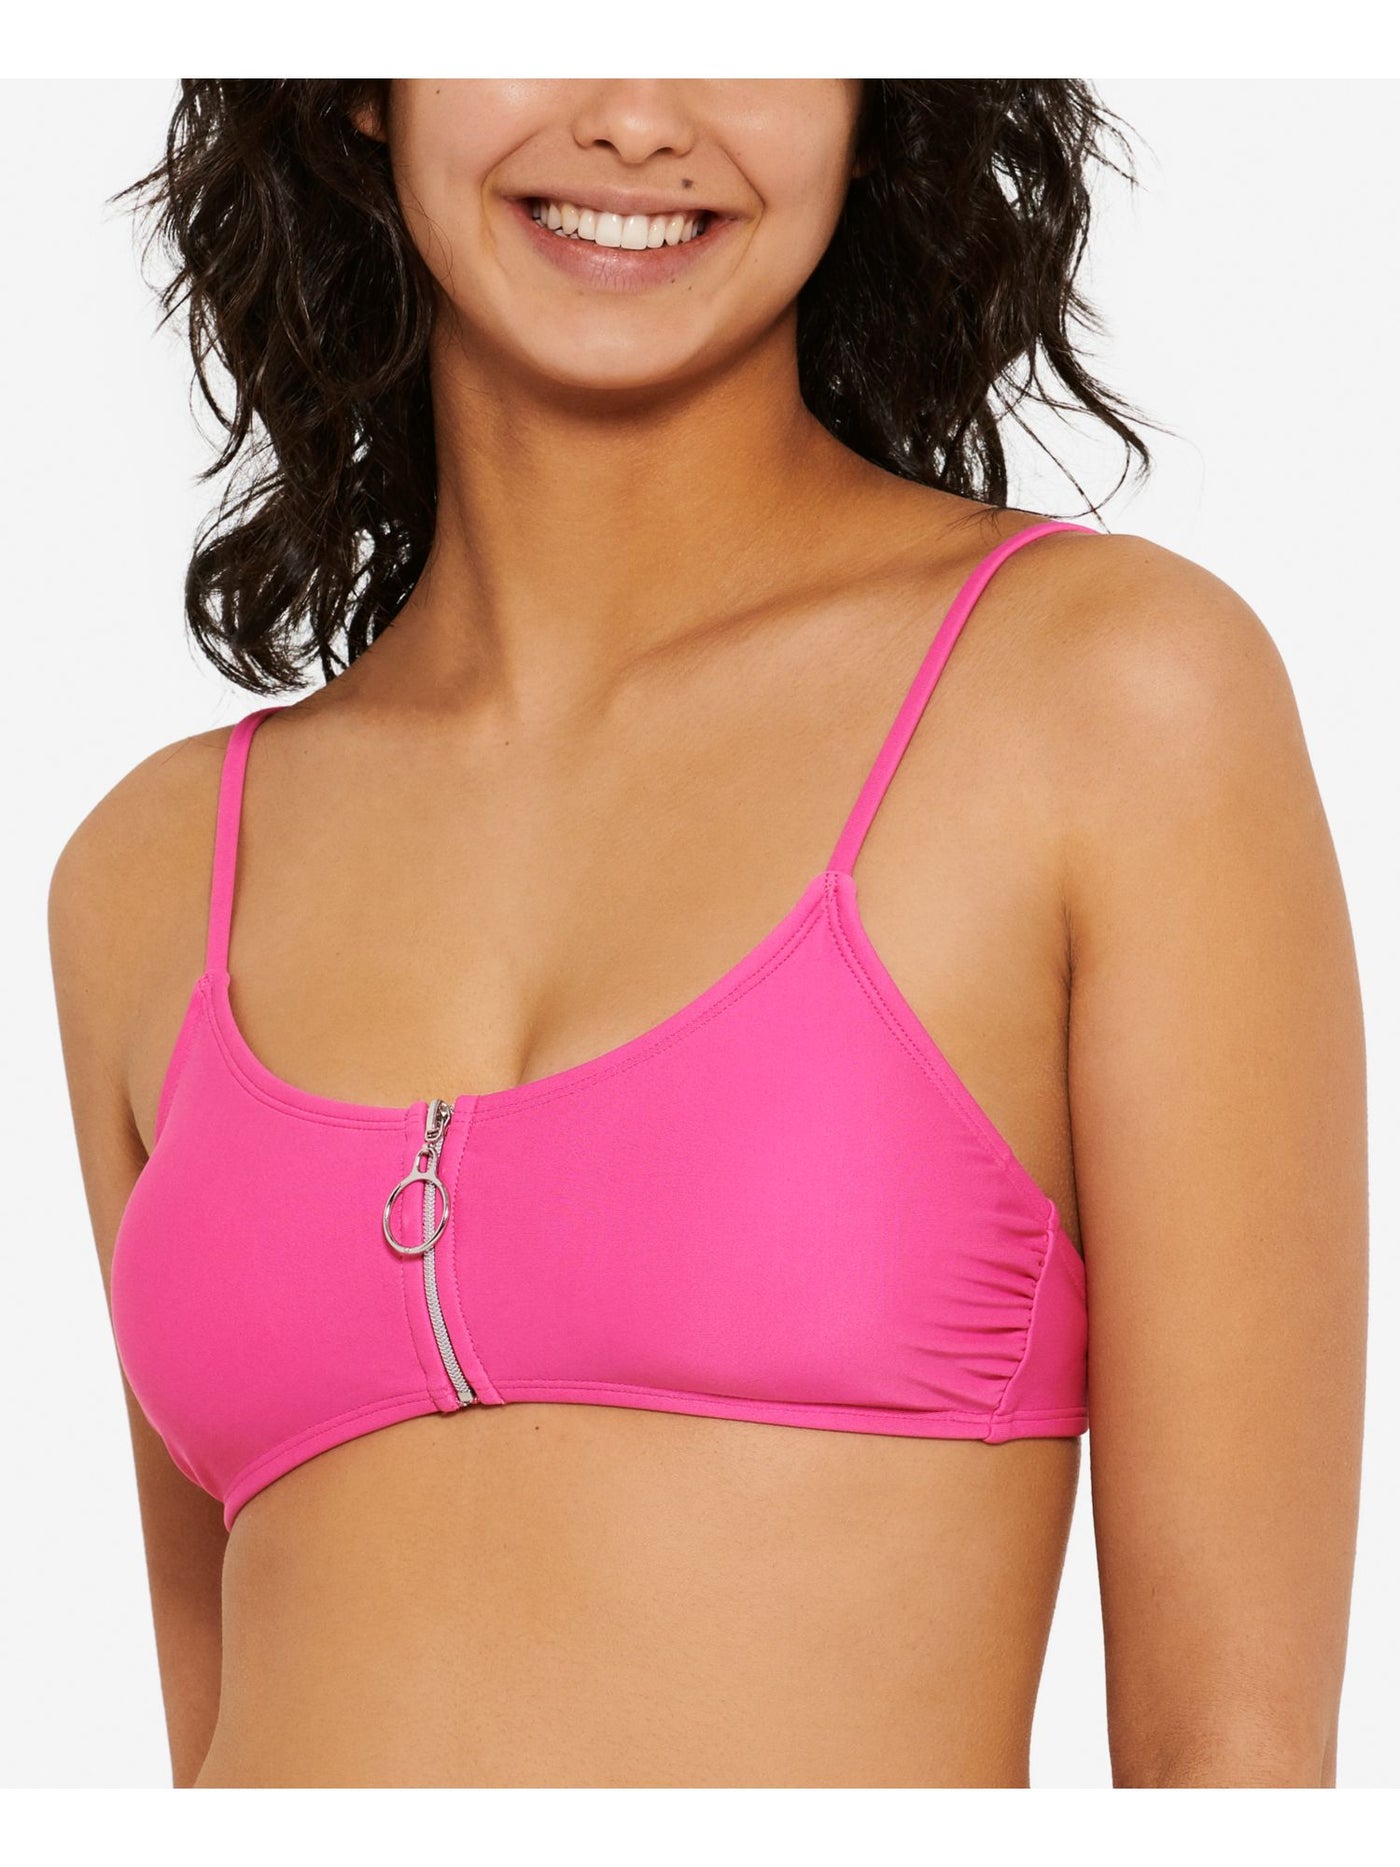 HULA HONEY Women's Pink Stretch Zippered Adjustable Bralette Swimsuit Top S